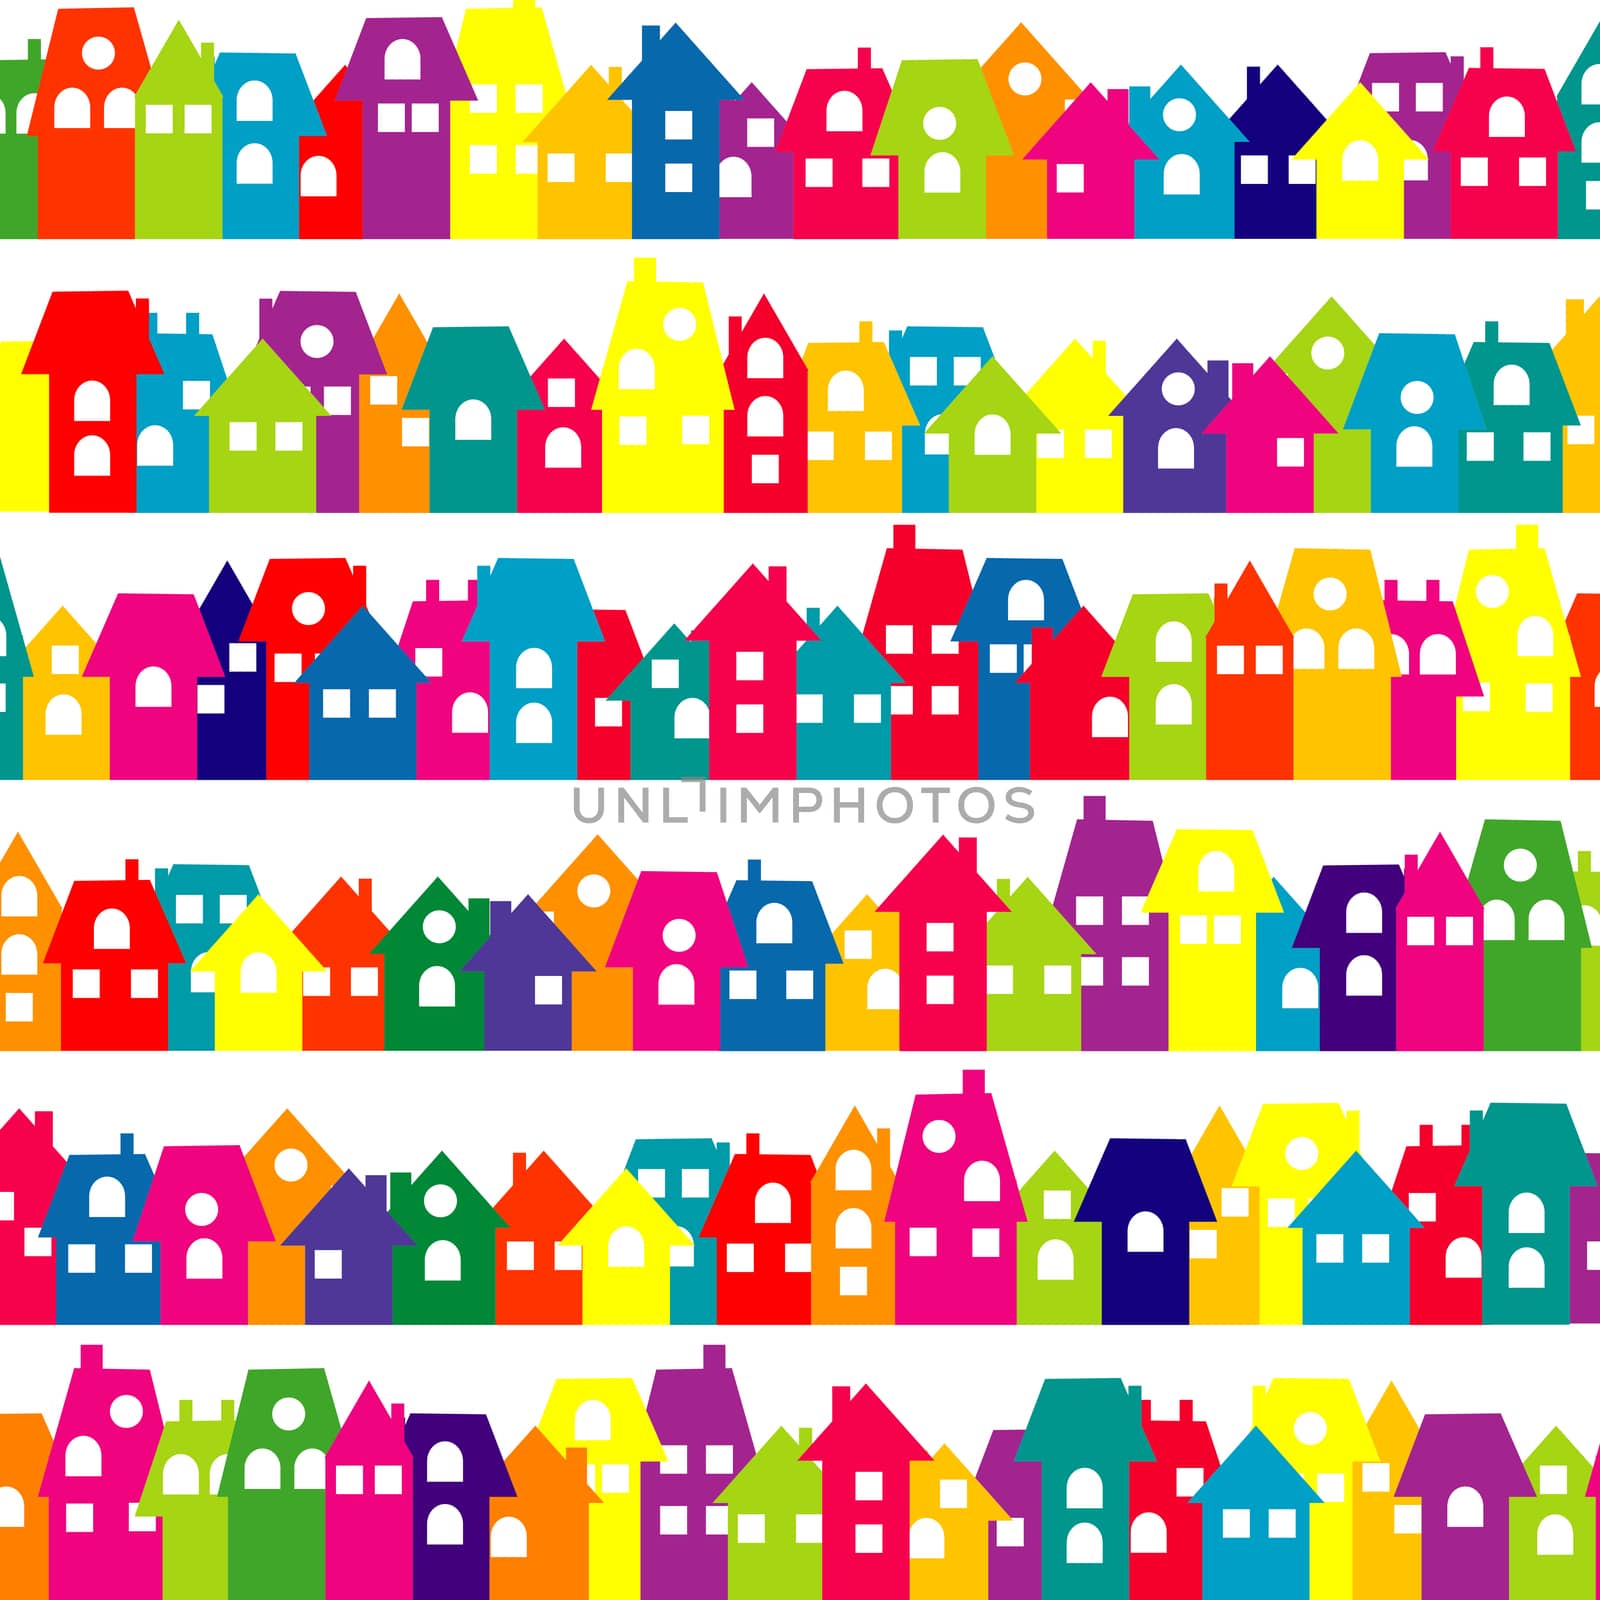 Background with colored doodle houses by hibrida13